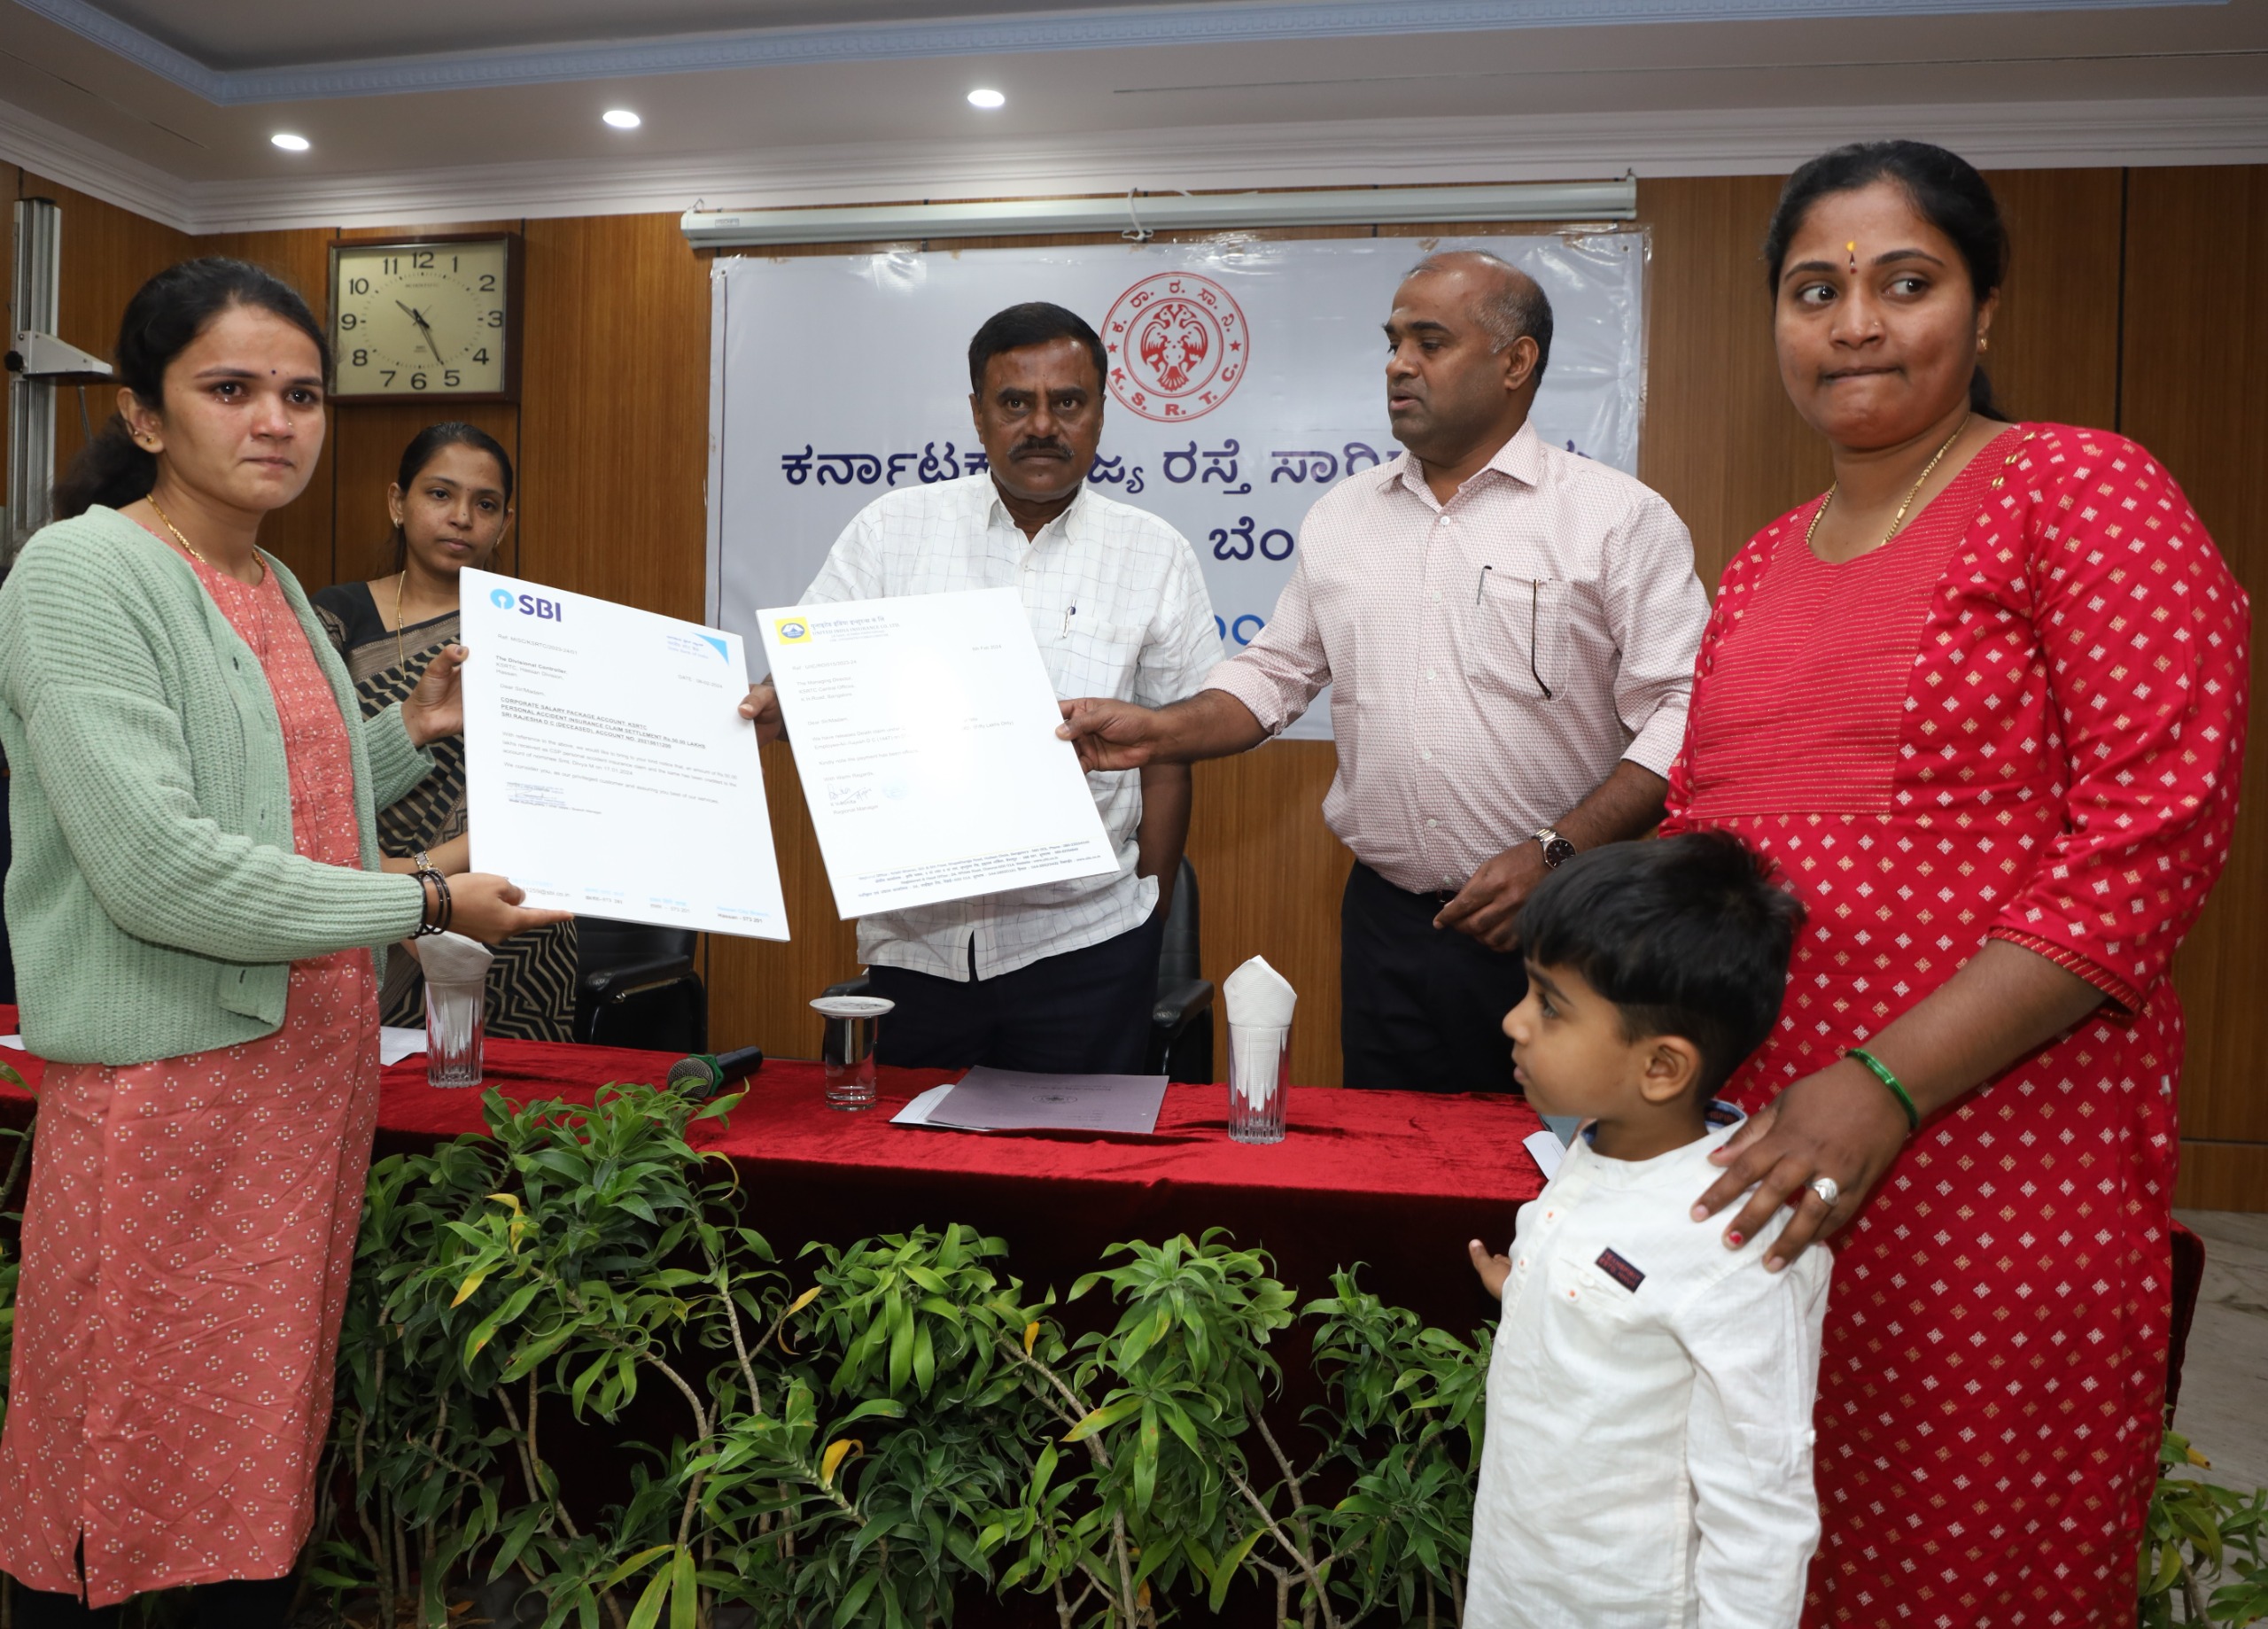 ksrtc-distributed-10-lakh-compensation-to-families-of-deceased-employees